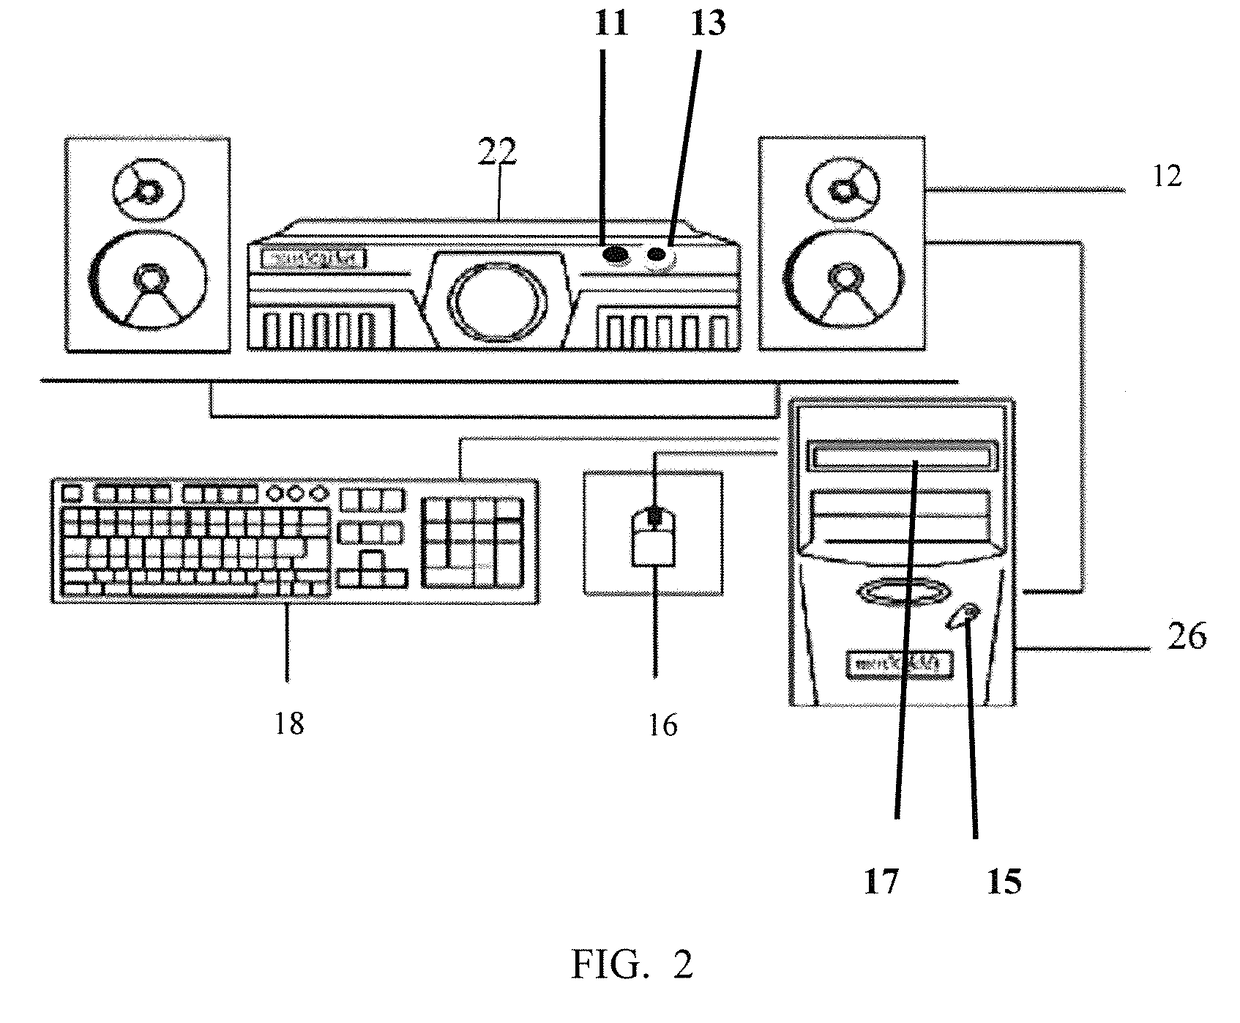 Cognitive training system and method